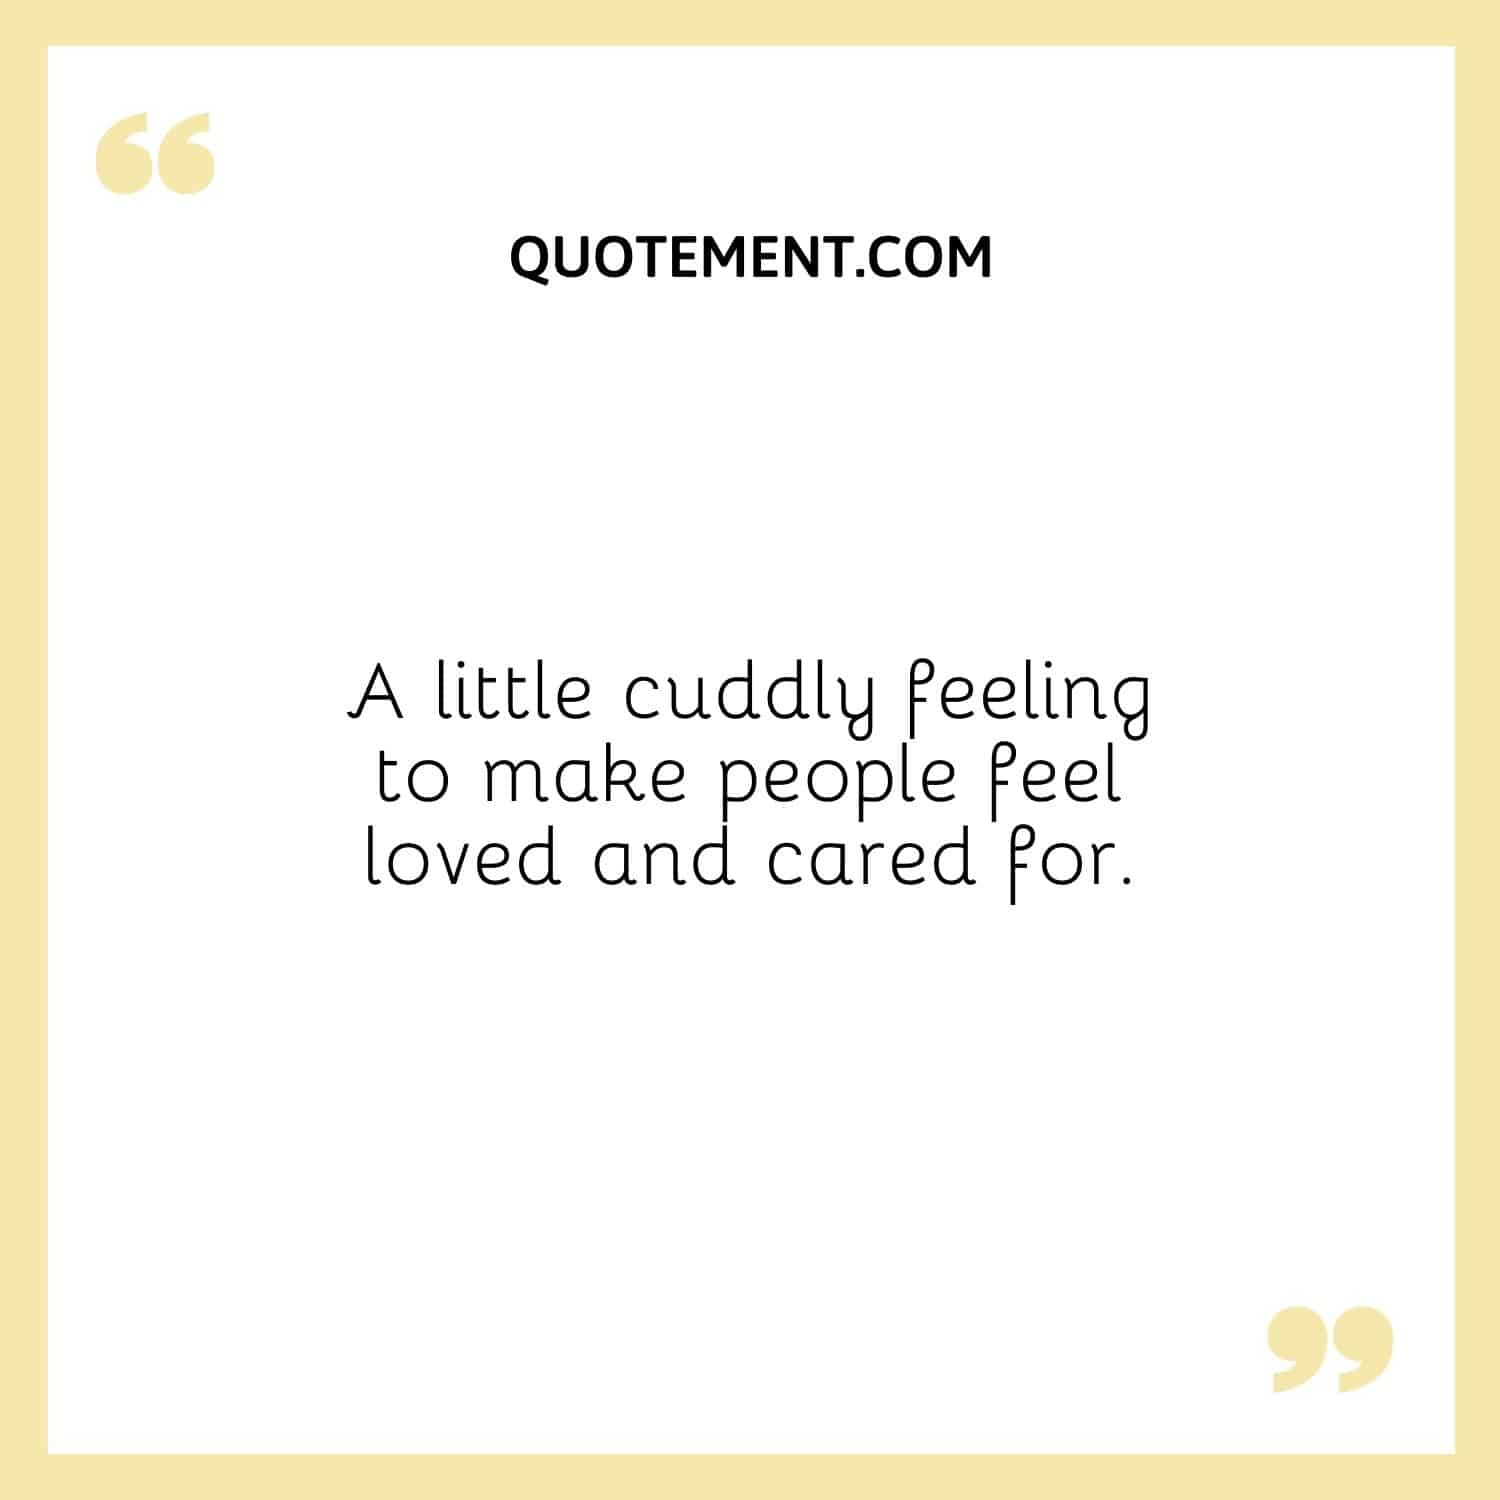 A little cuddly feeling to make people feel loved and cared for